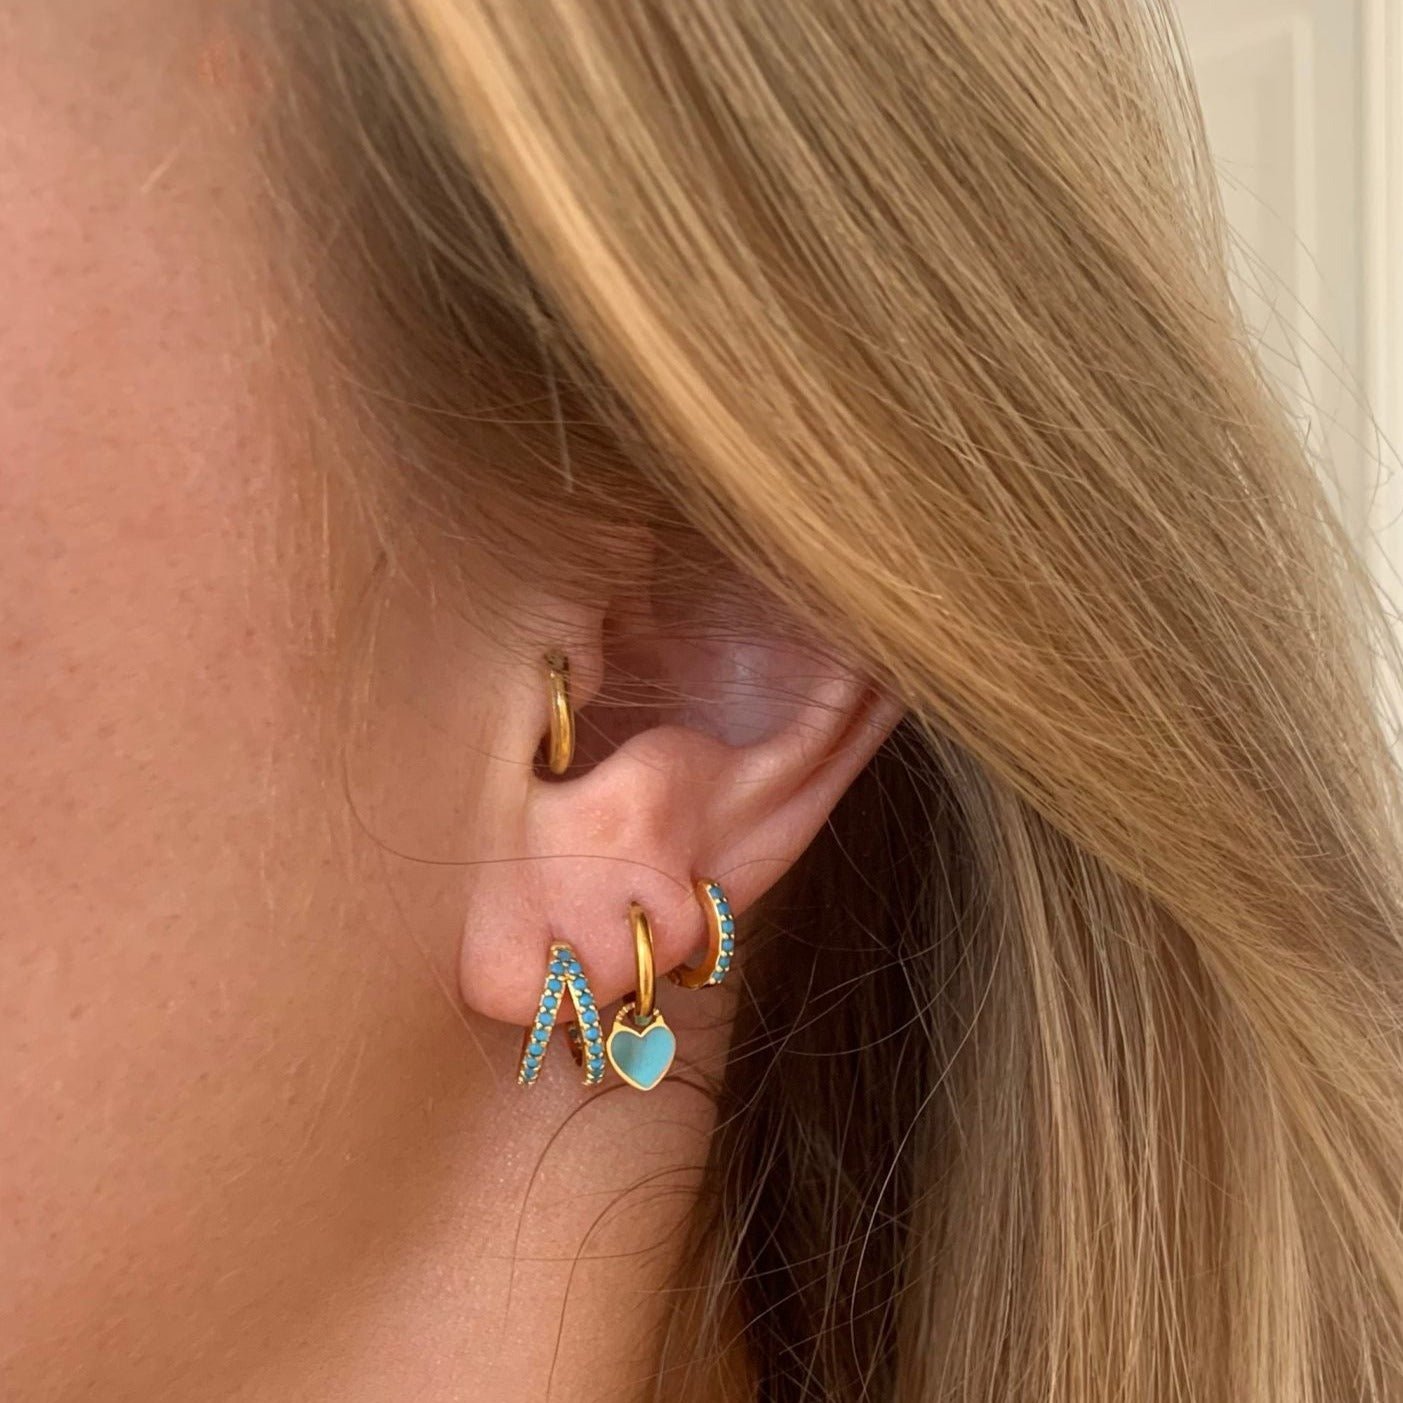 Blonde model's ear adorned with gold Row Huggies Earrings with turquoise stones - IceGlint